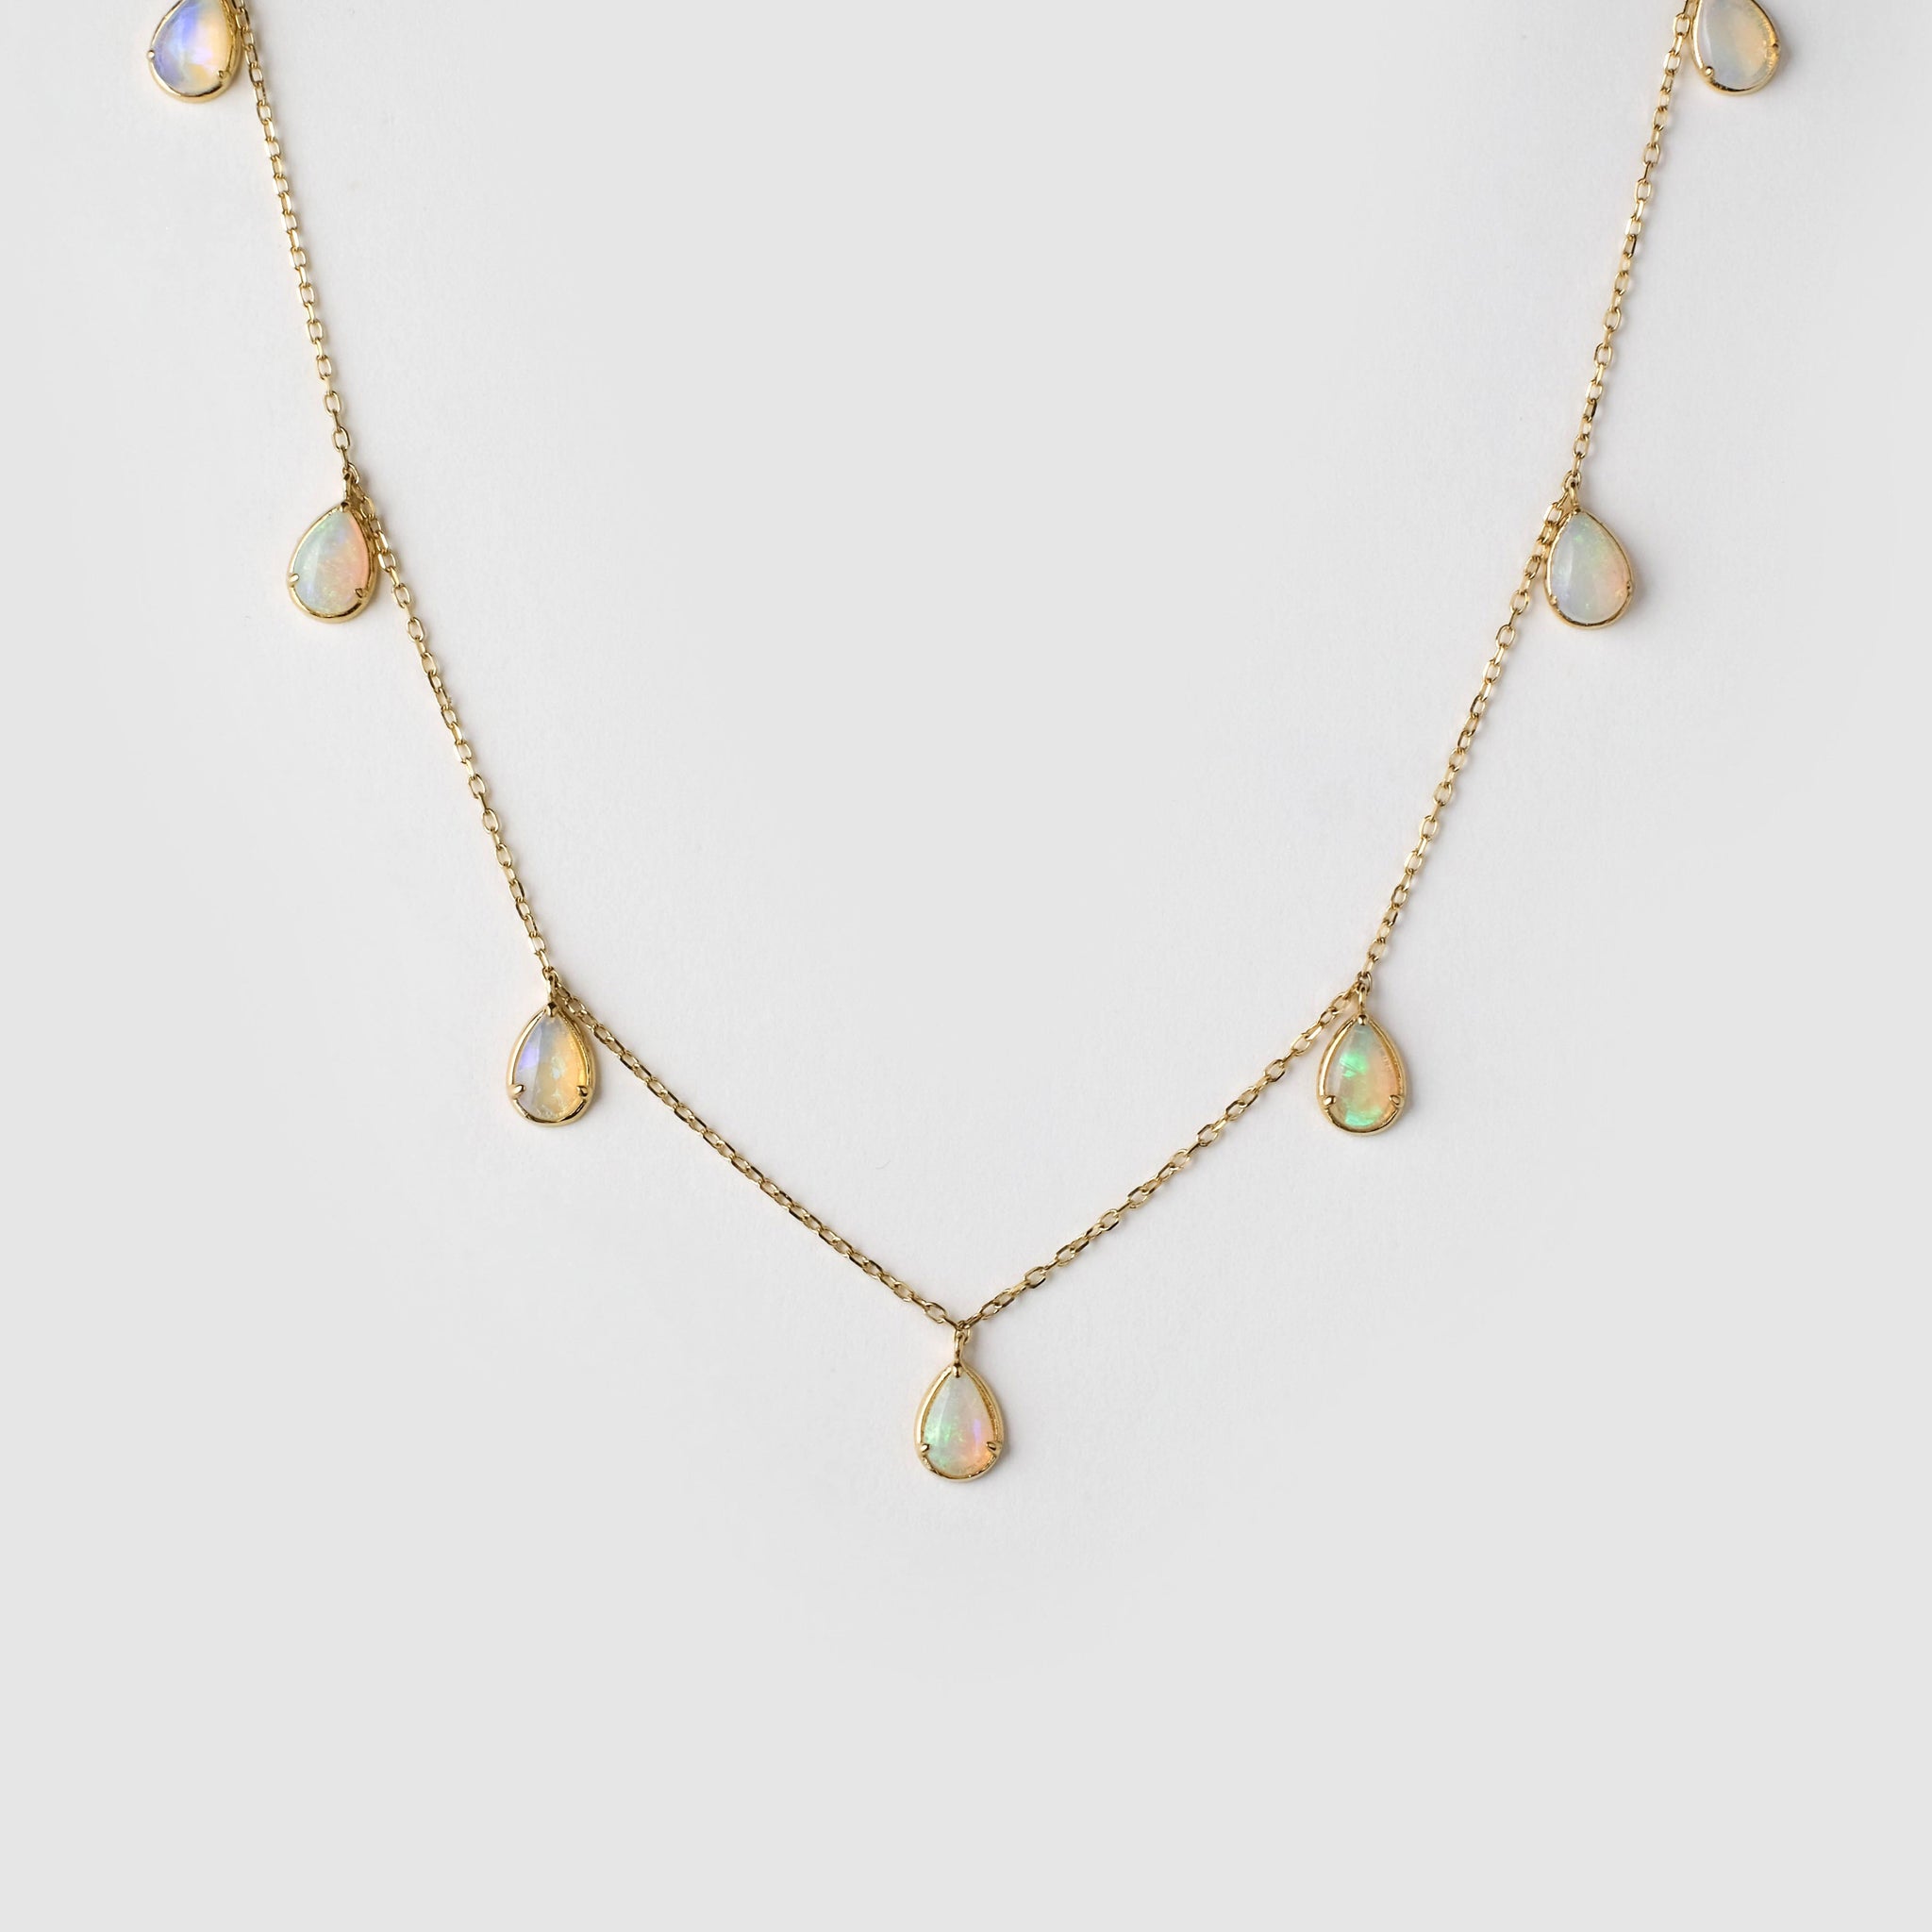 Drop Opal Muti-stone Necklace, 18k solid gold